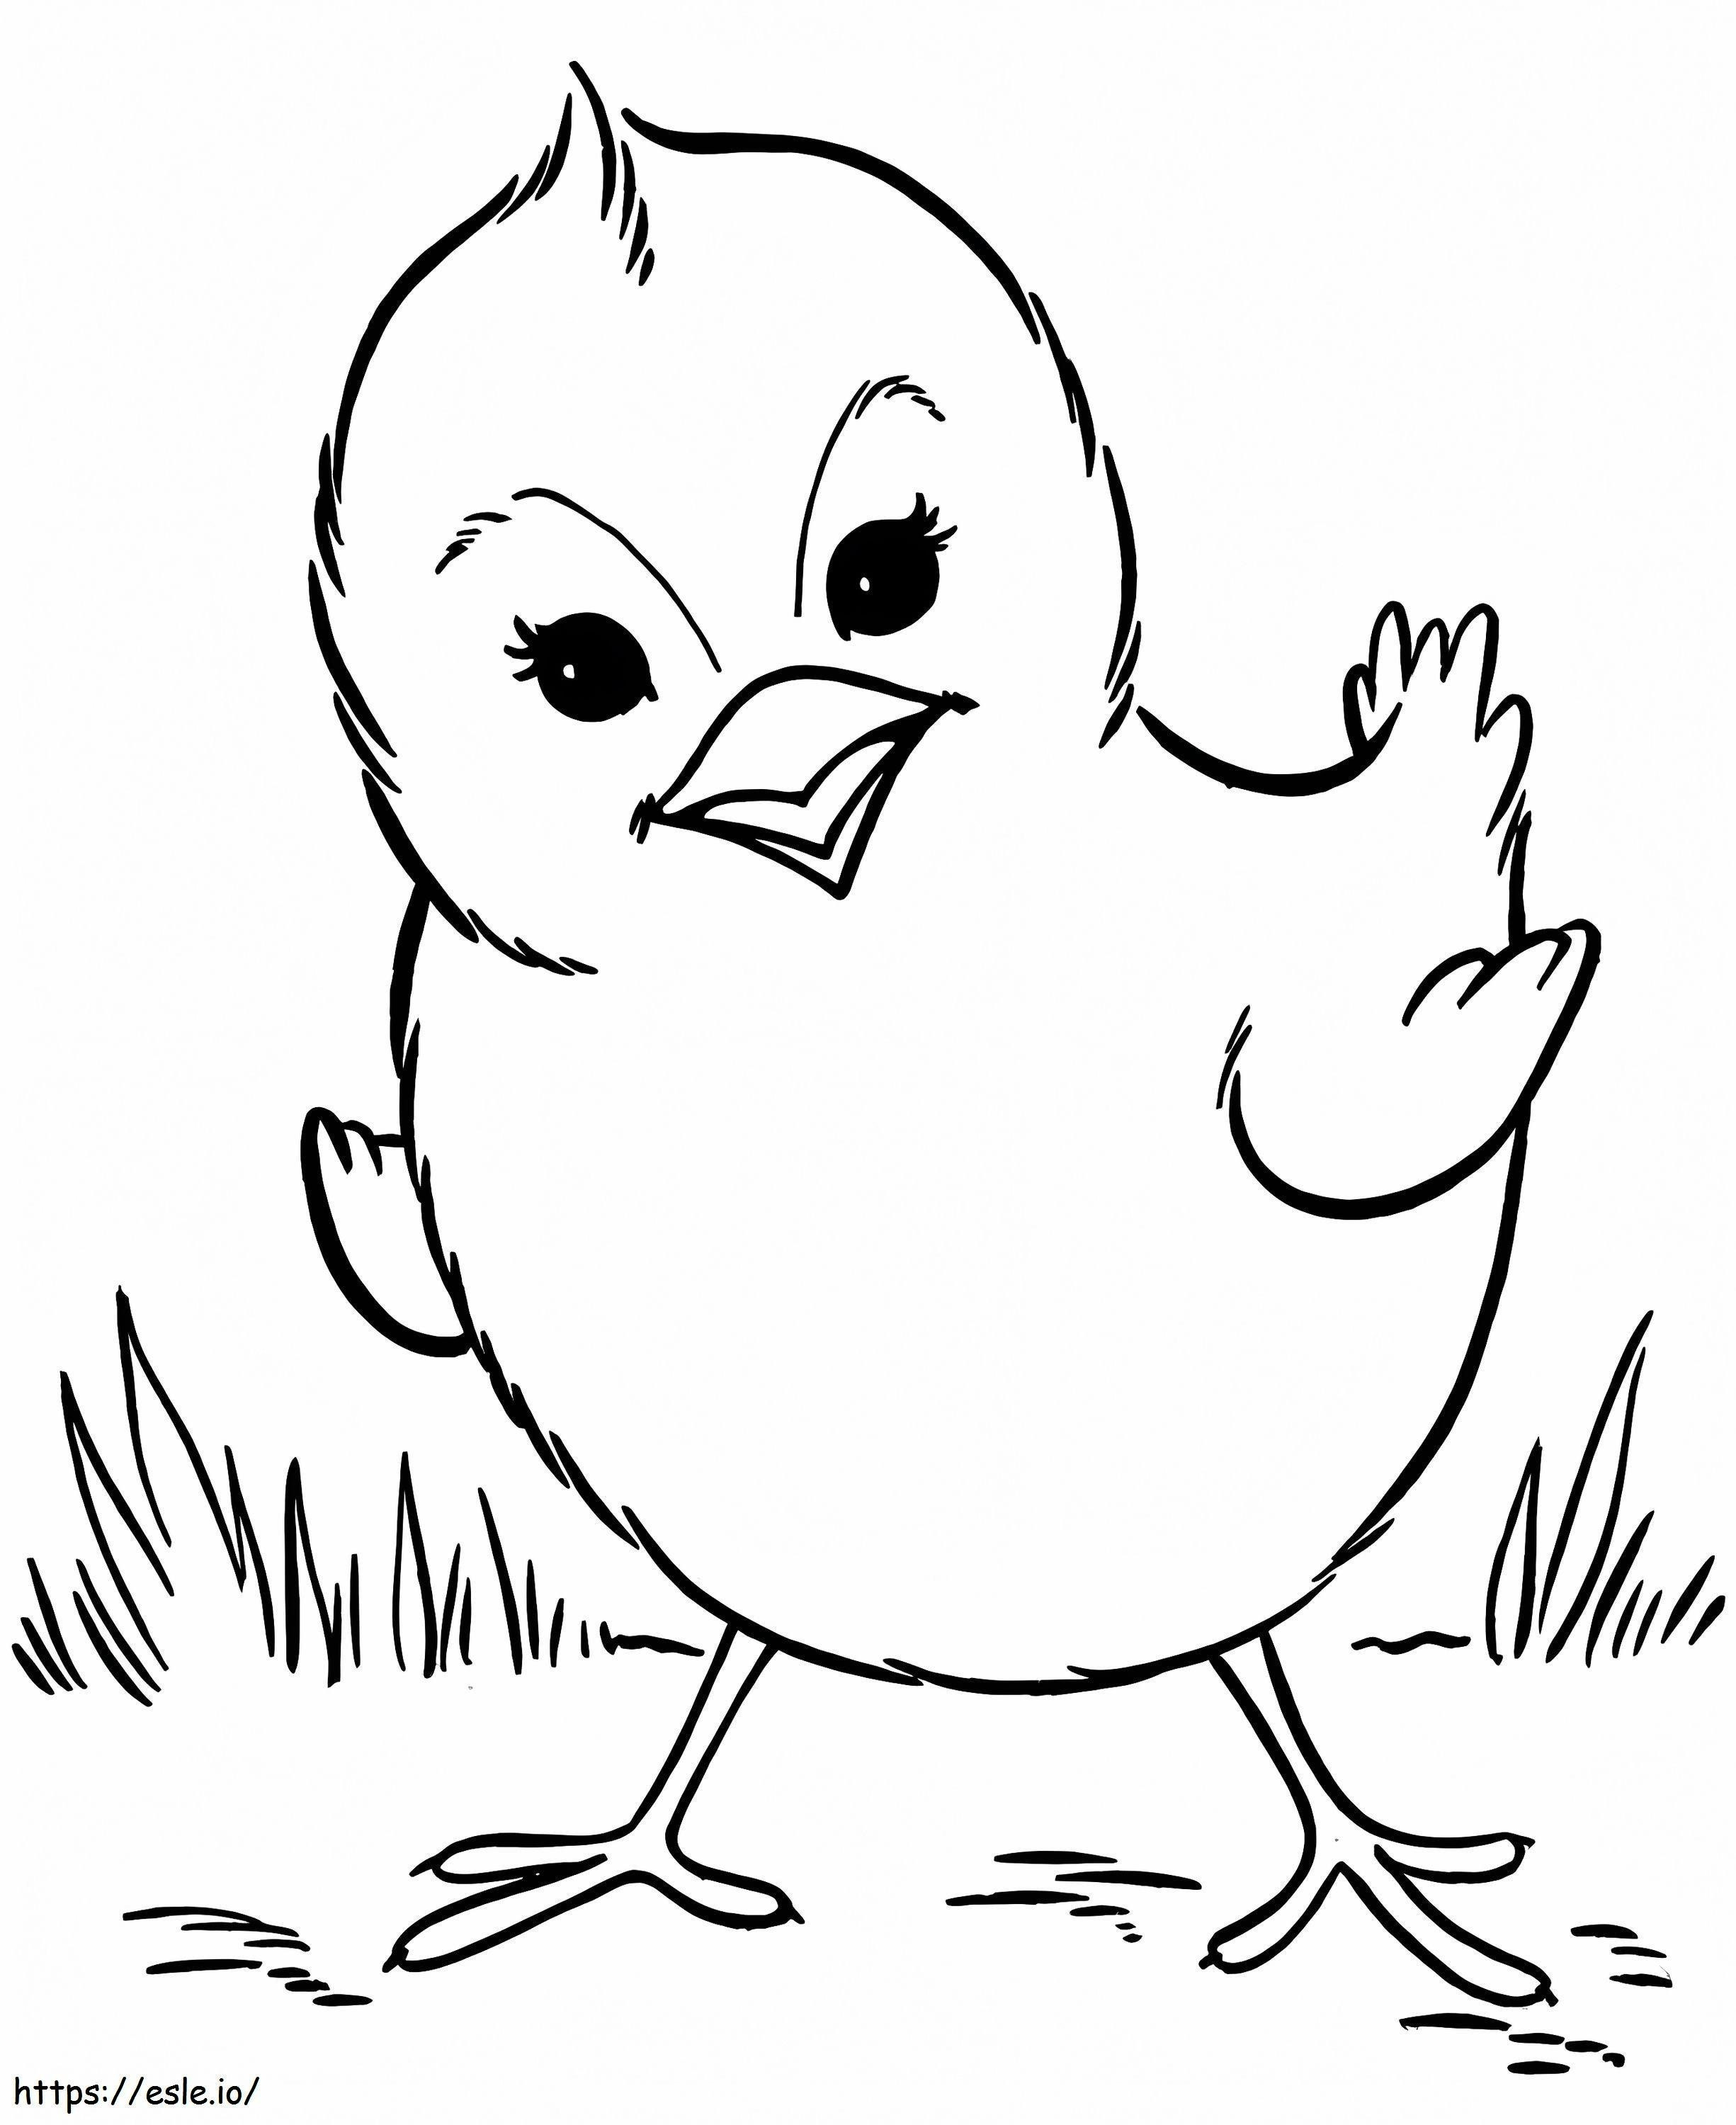 Cool Chick coloring page